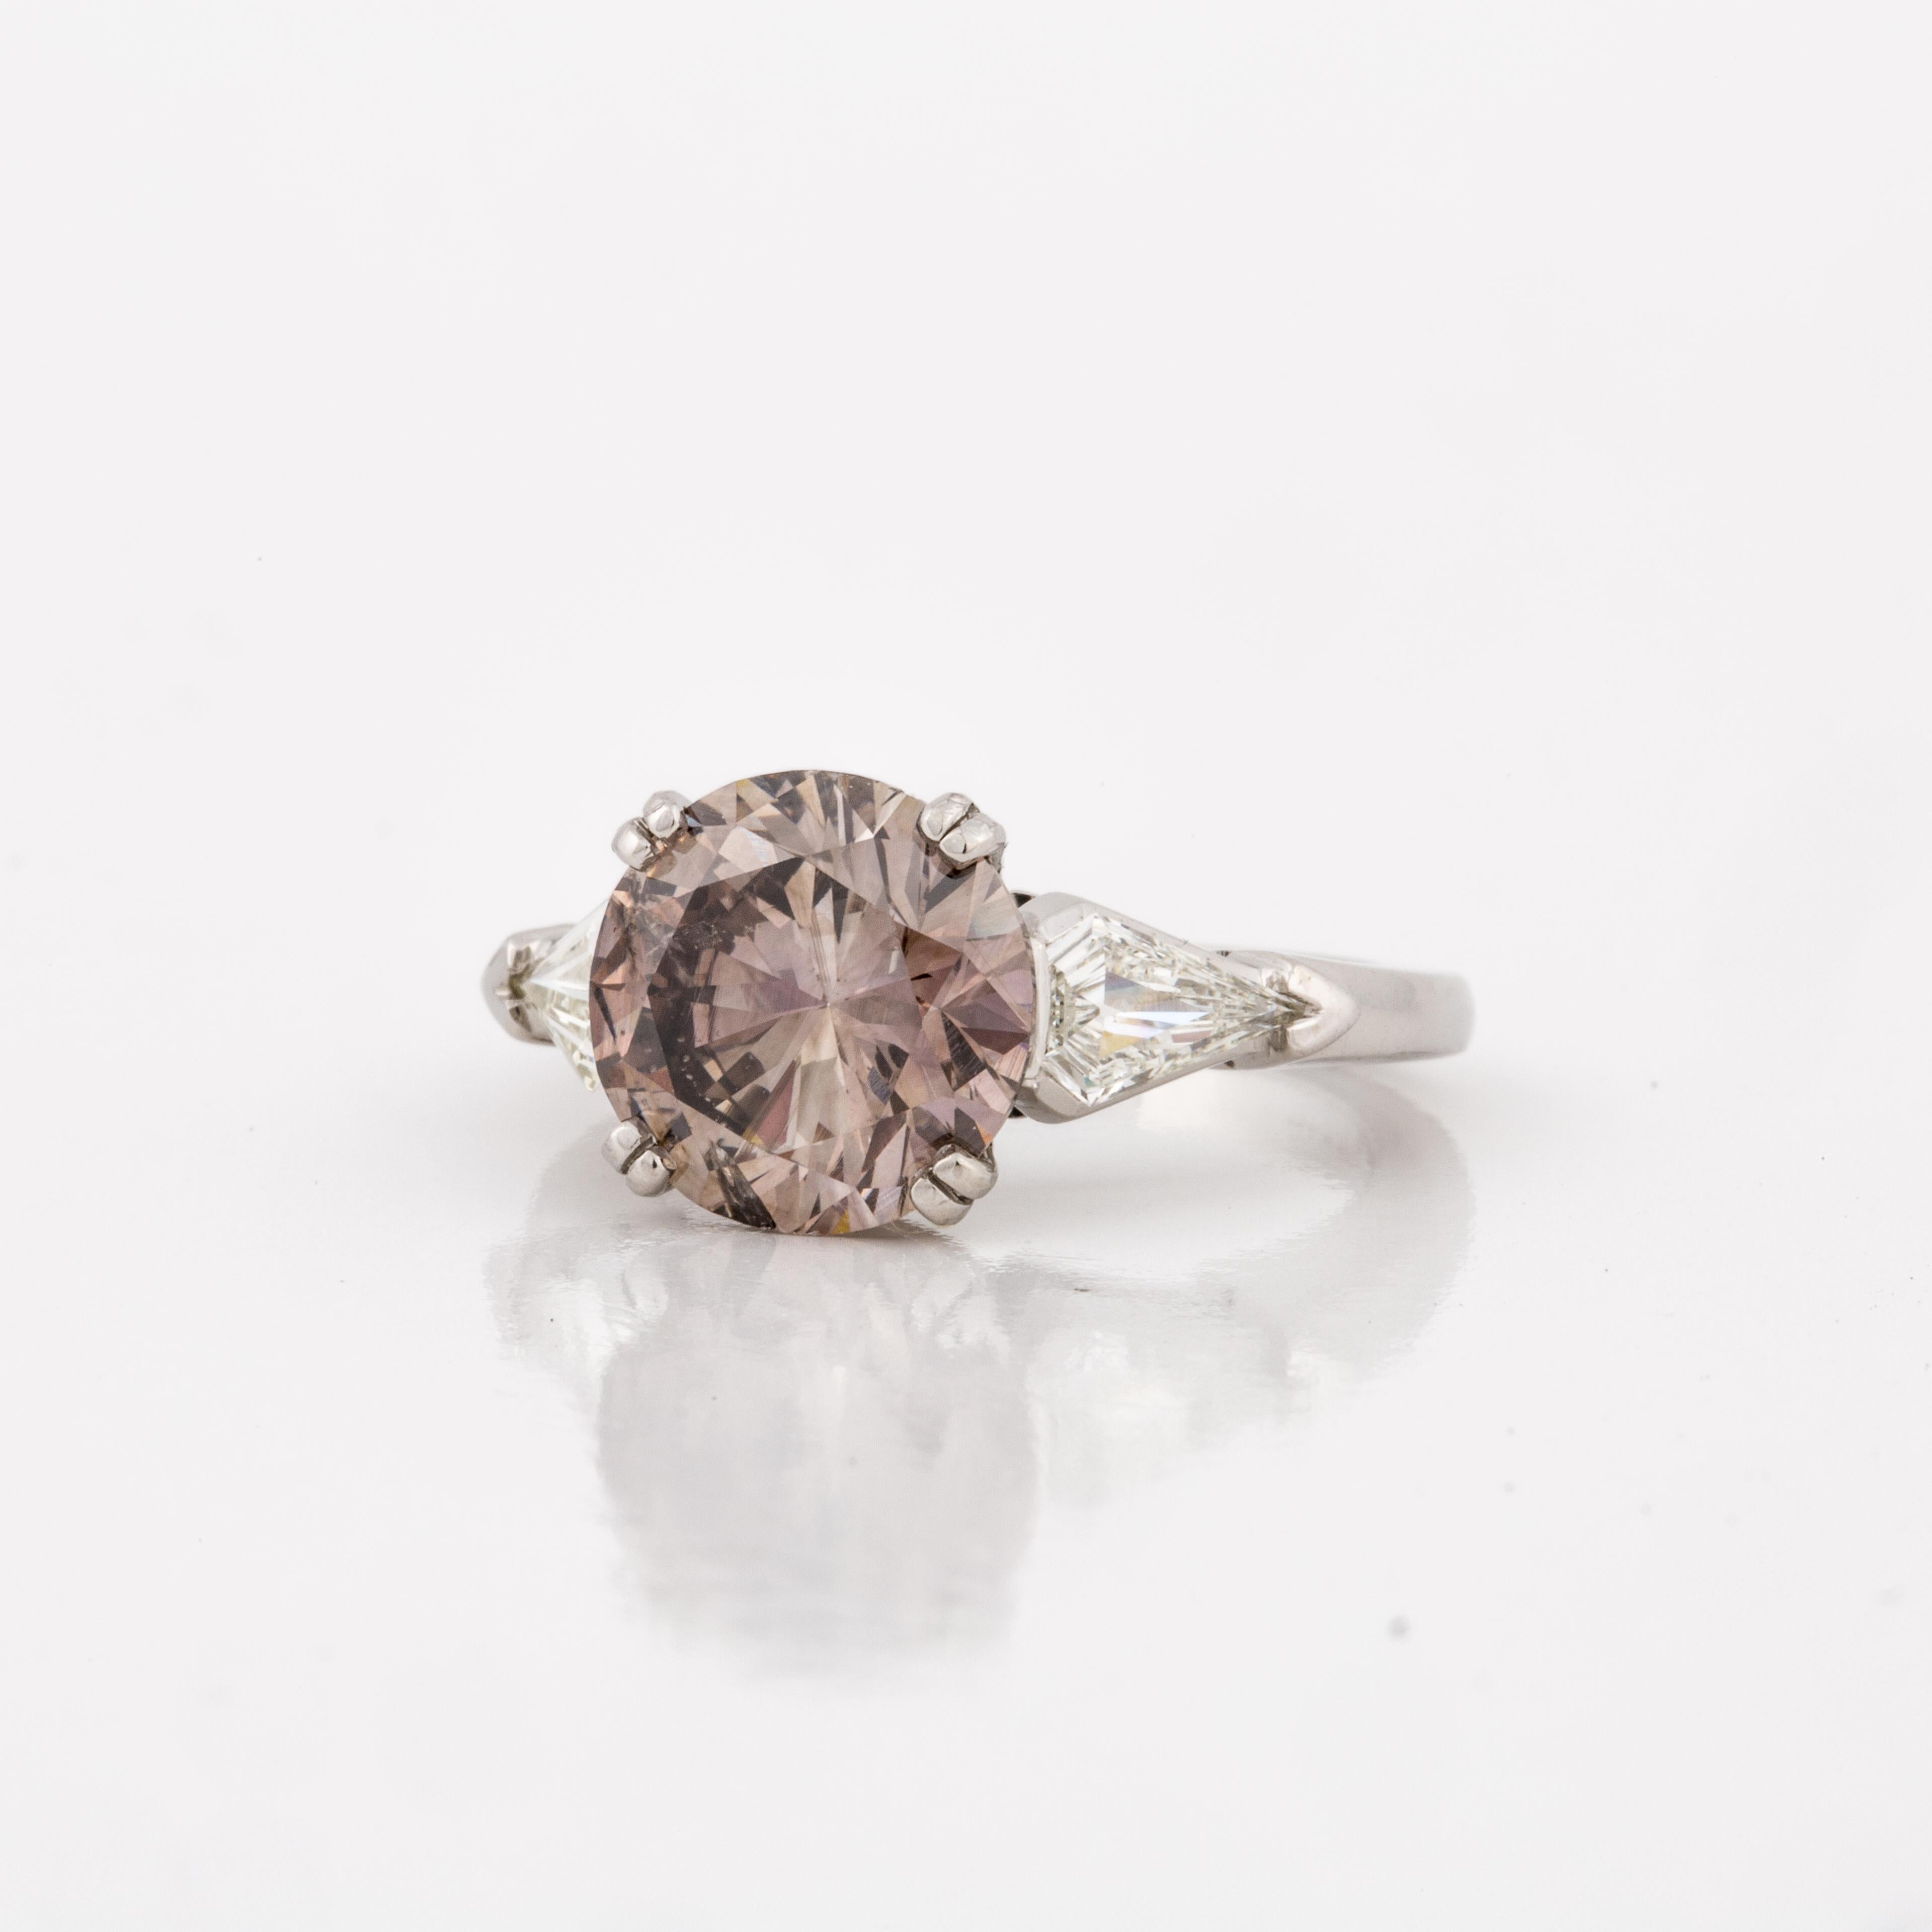 Platinum diamond ring featuring a 4.17 carat fancy dark pinkish-brown diamond accompanied by a GIA certificate.  There are 2 kite shaped accent side stones that total 0.60 carats, I-K color and VS2 clarity.  Ring is currently a size 6.  